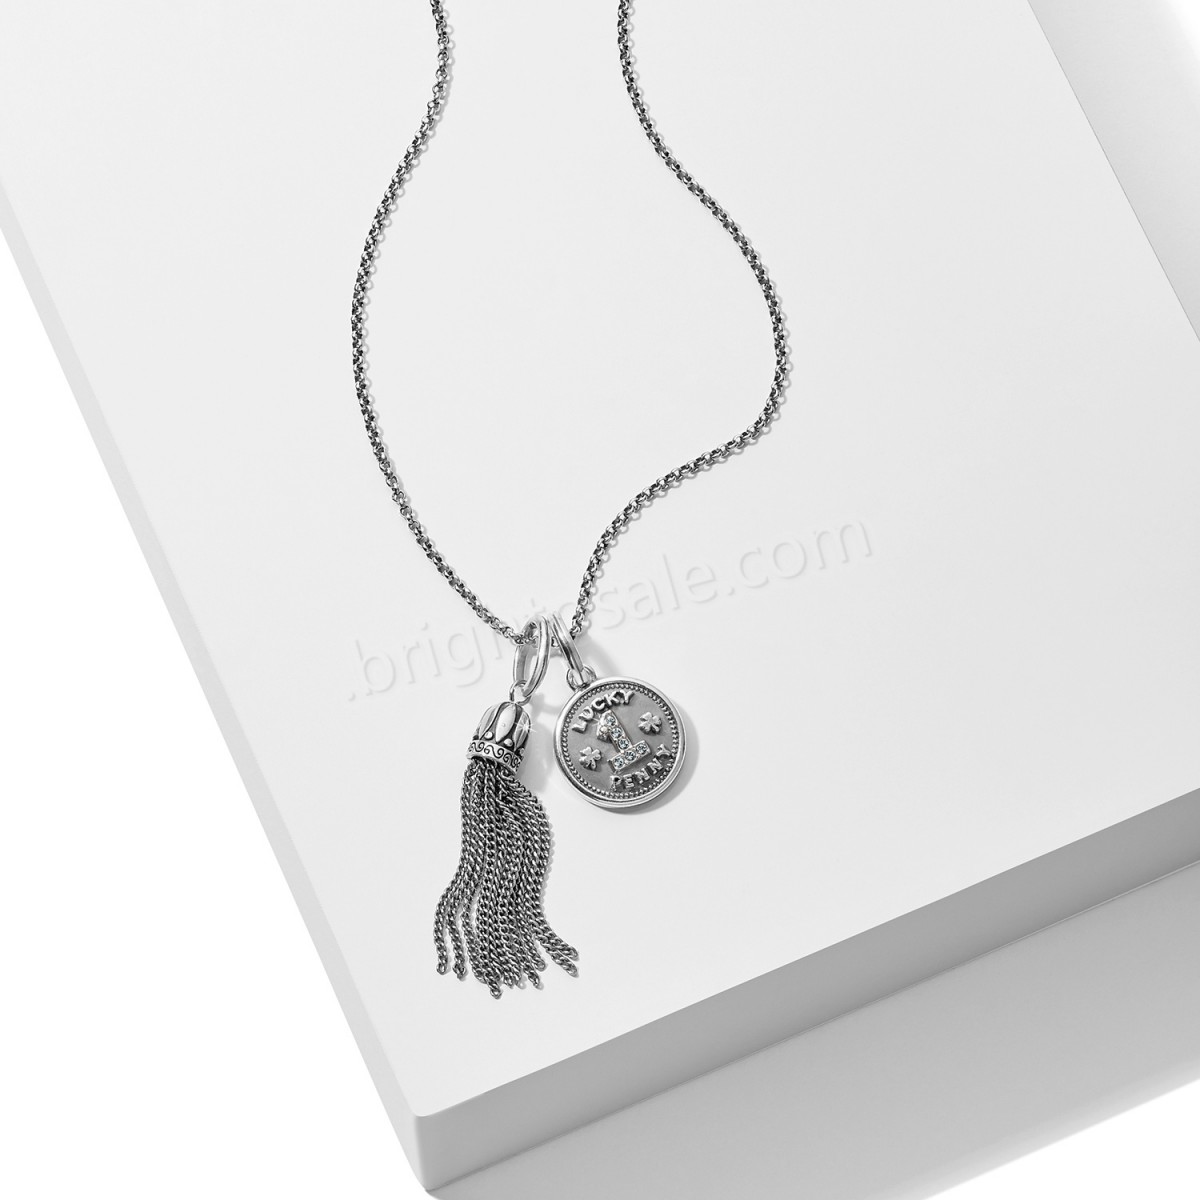 Brighton Collectibles & Online Discount Choose Love Amulet Necklace Gift Set - -0